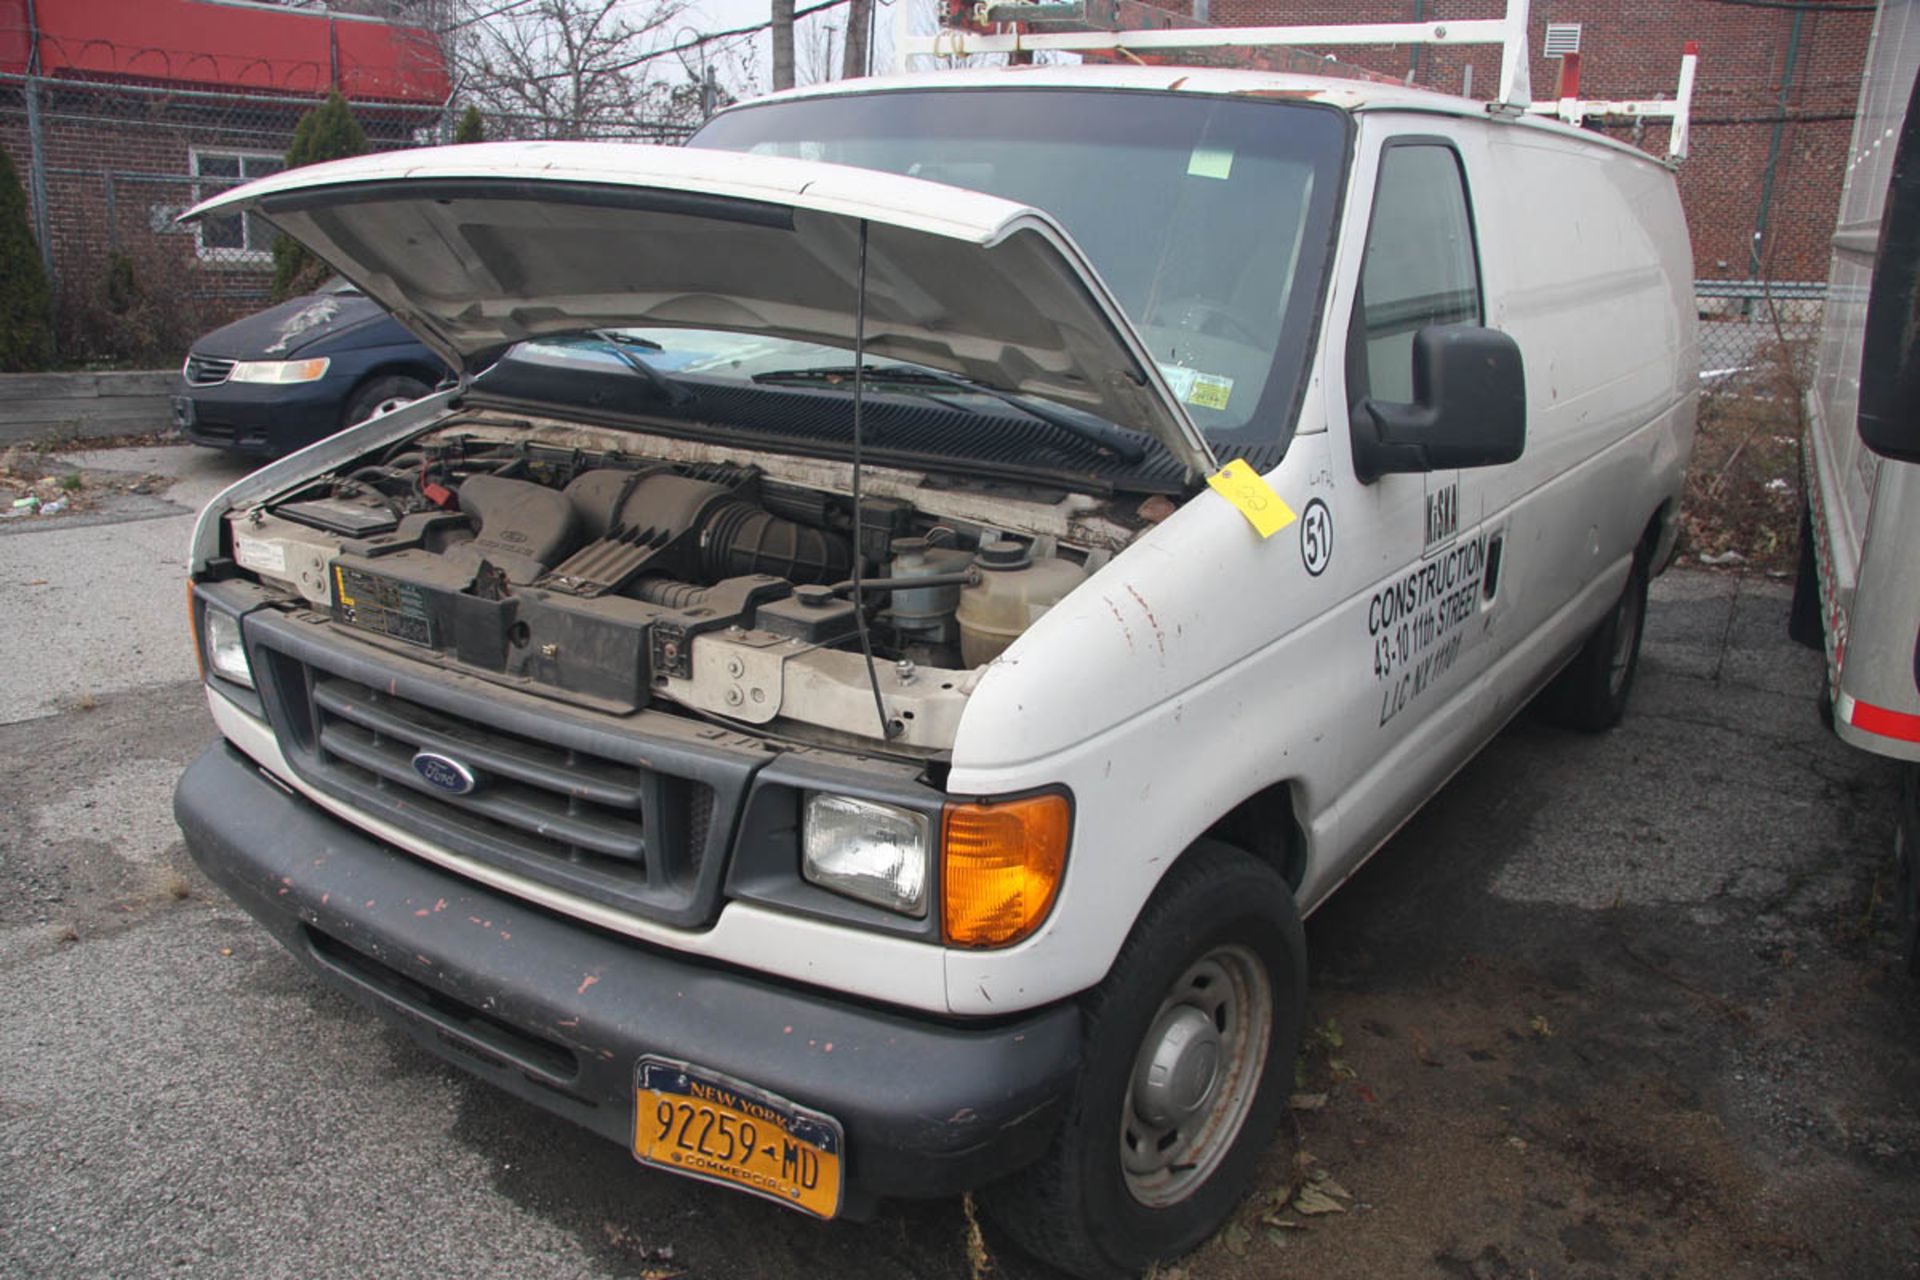 2006 FORD E-150 PANEL VAN, AUTOMATIC, APPROXIMATELY 68,506 MILES, VIN: 1FTRE14W4GDA37079 (#51) [